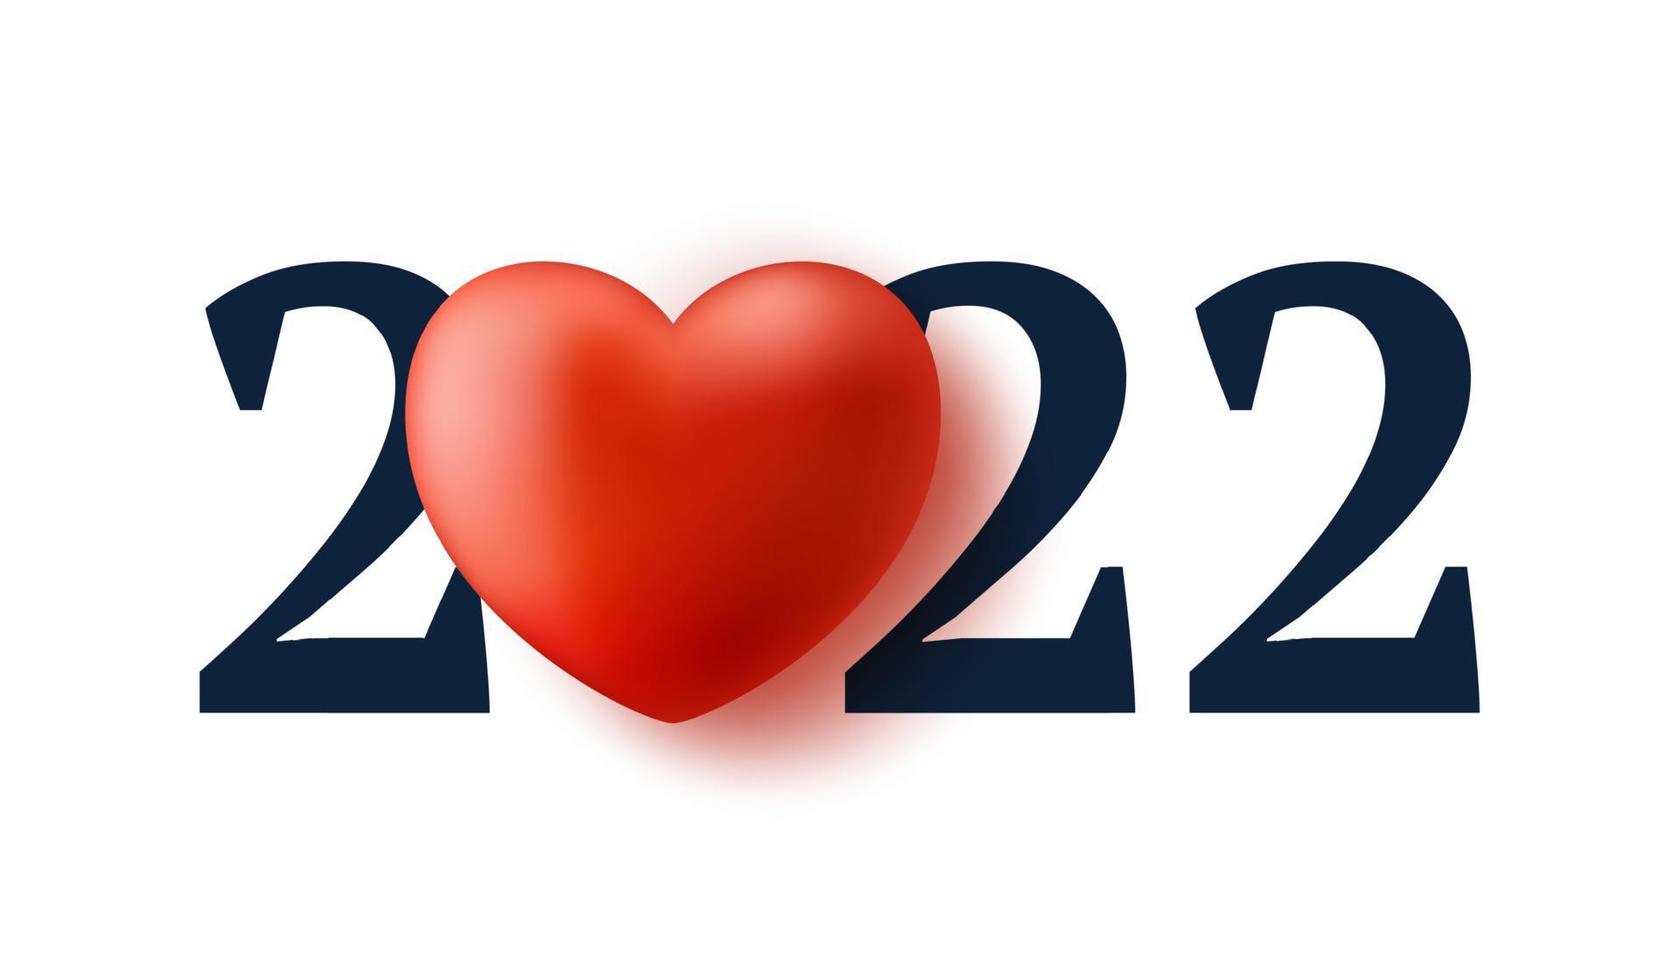 2022-love-new-year-illustration-happy-new-year-2022-with-realistic-heart-text-design-3d-concept-background-illustration-vector.jpeg